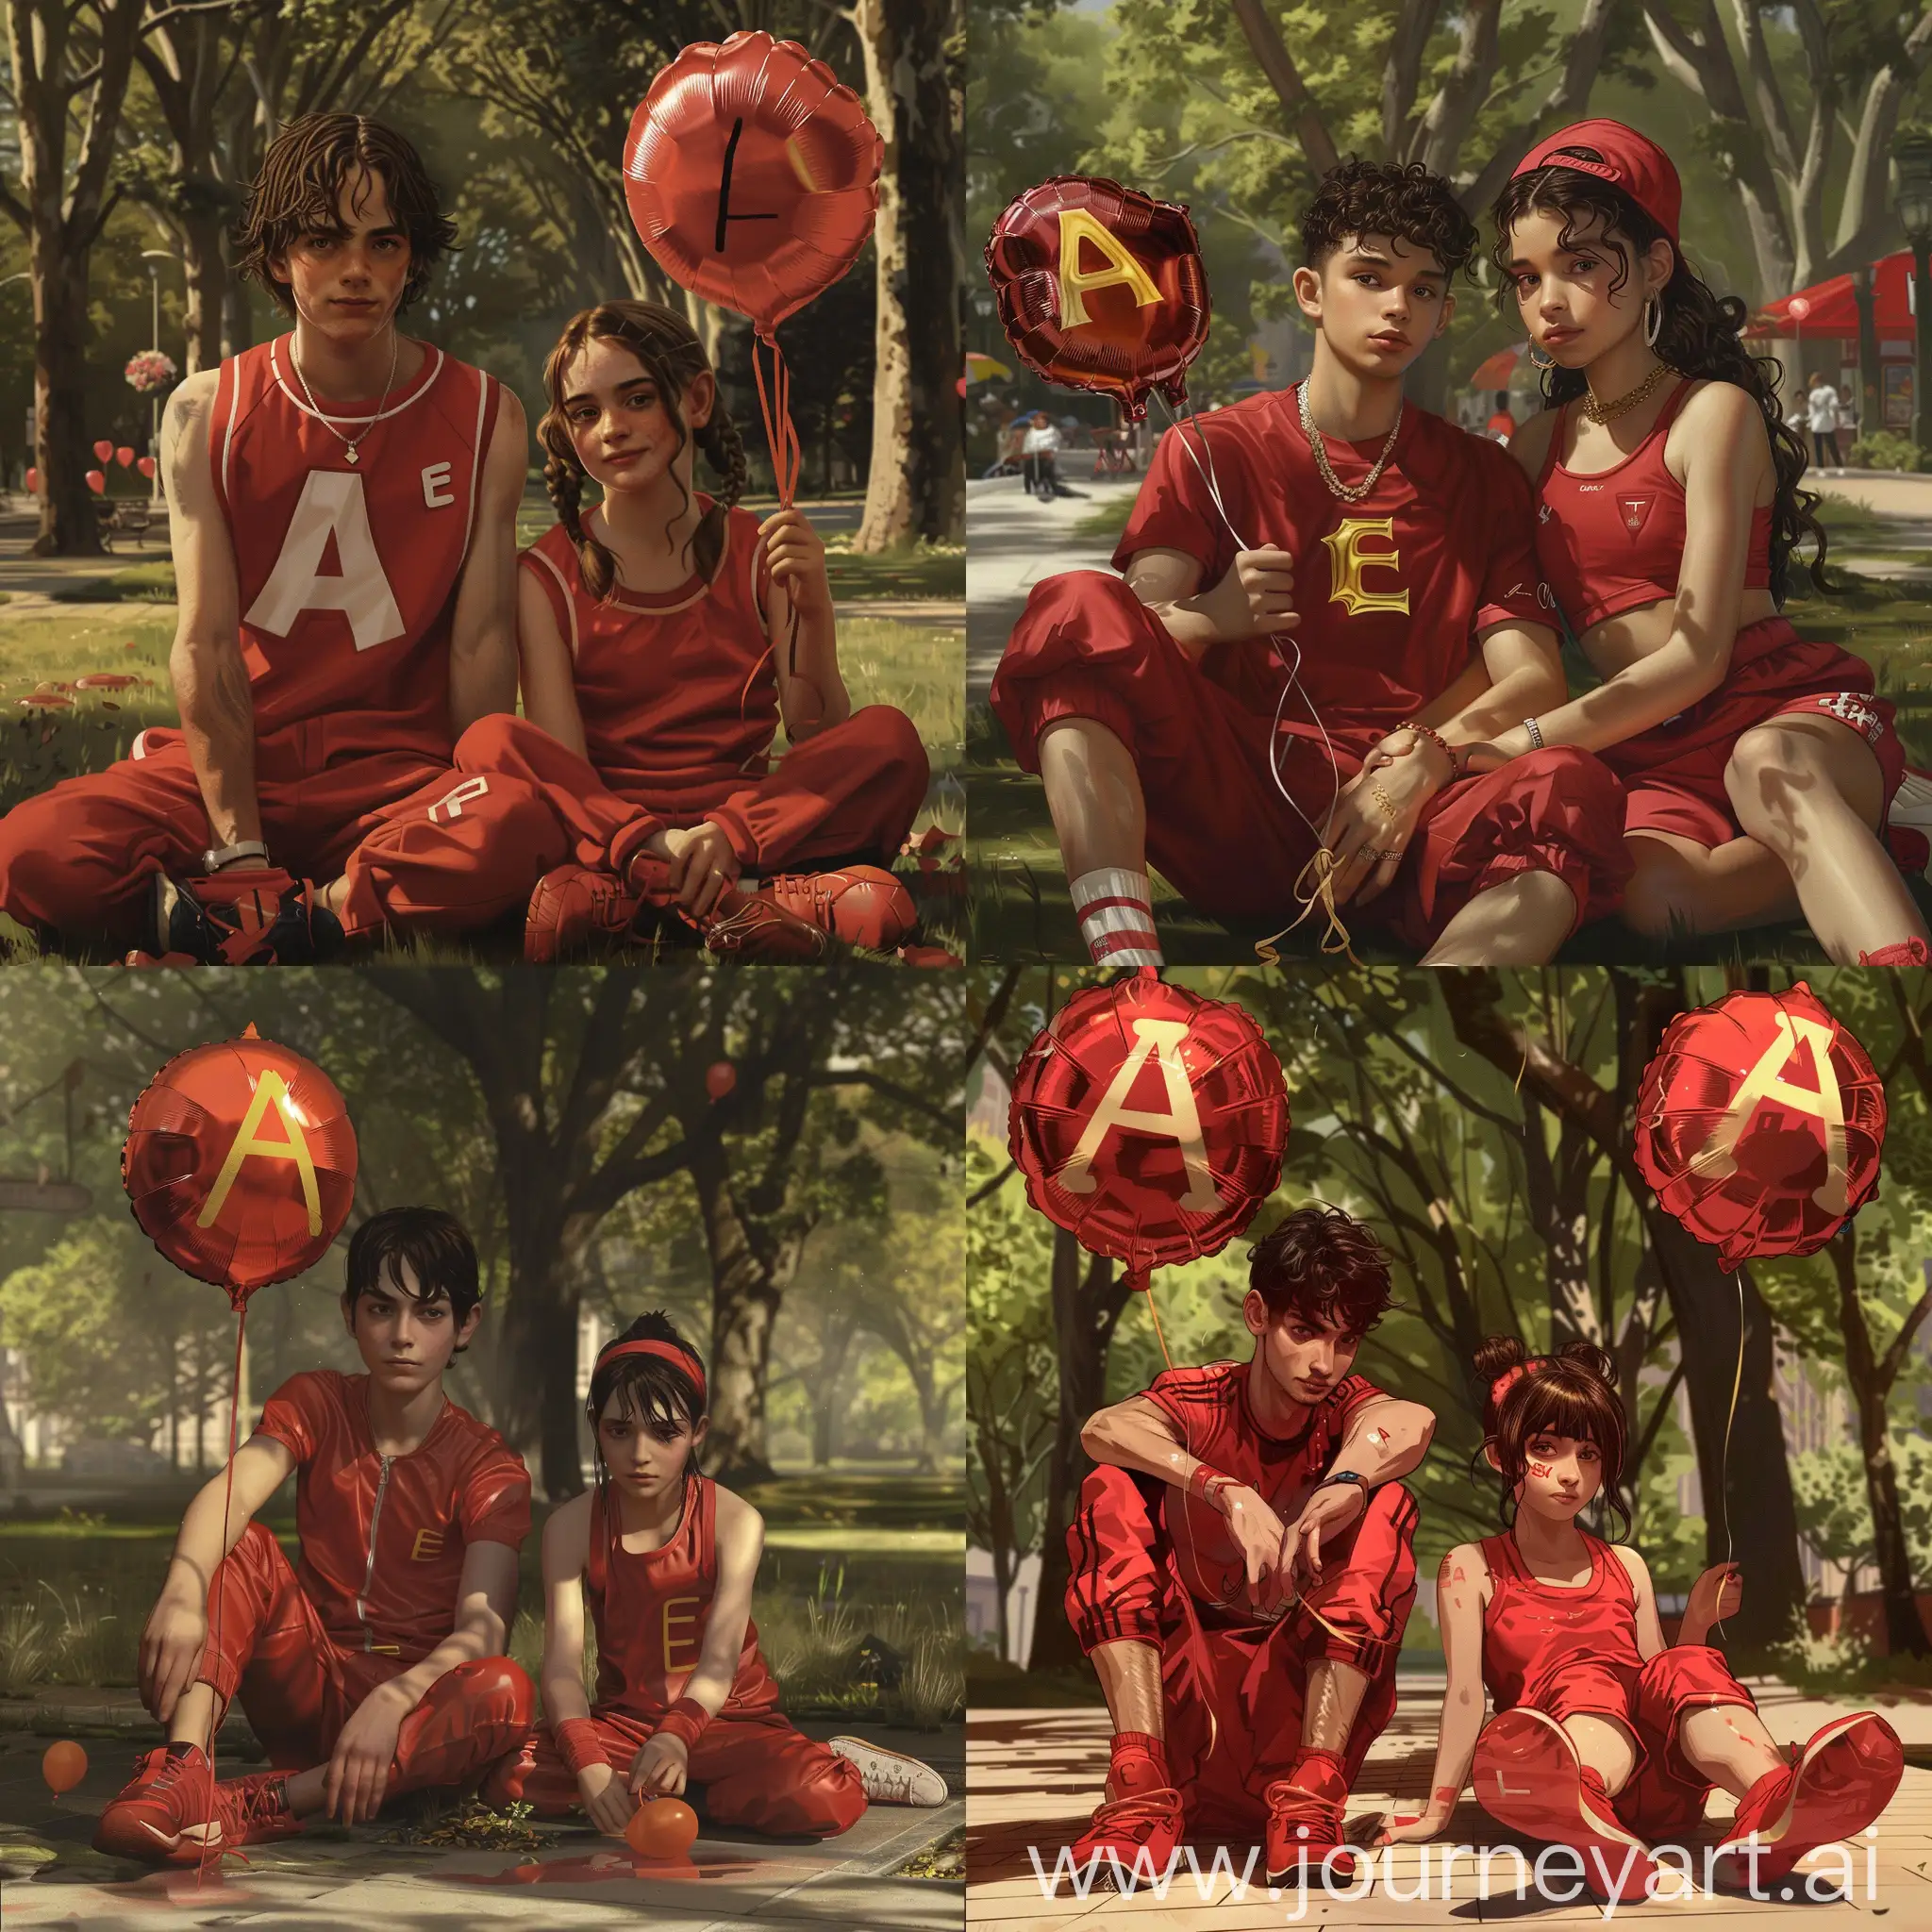 Young-Man-and-Girl-in-Red-Sportswear-Holding-Letter-Balloon-in-Park